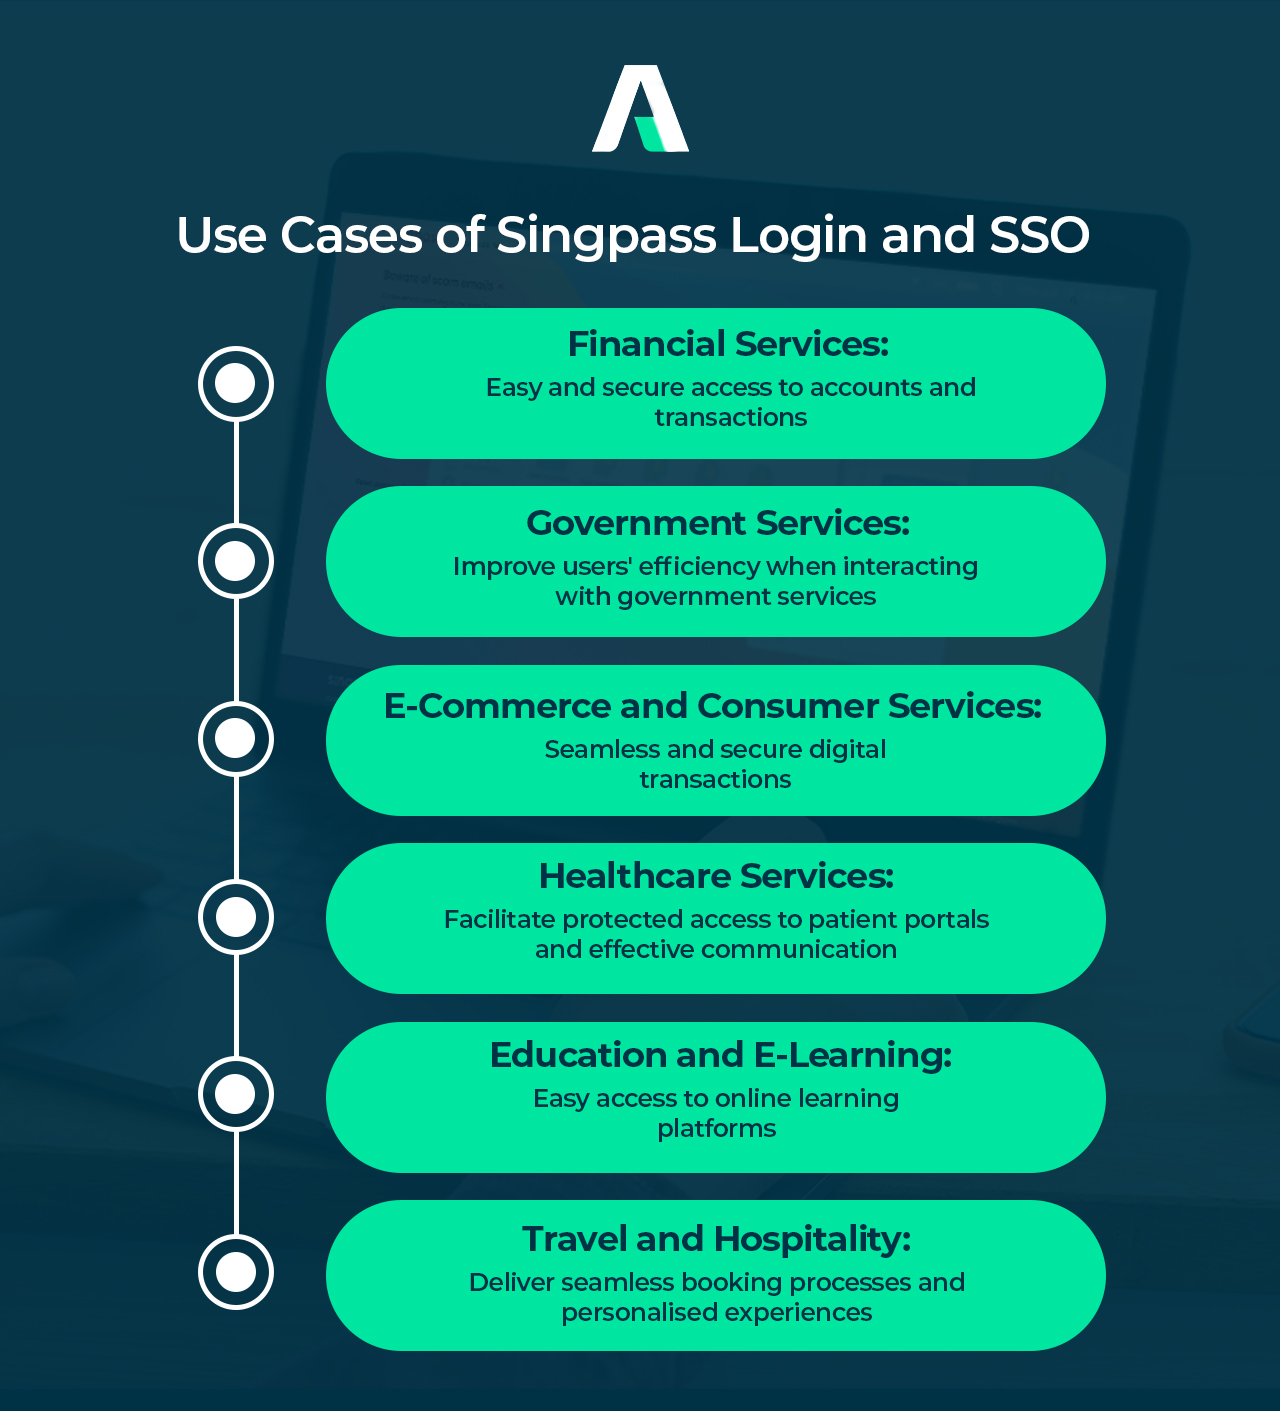 Use Cases of Singpass Login and SSO